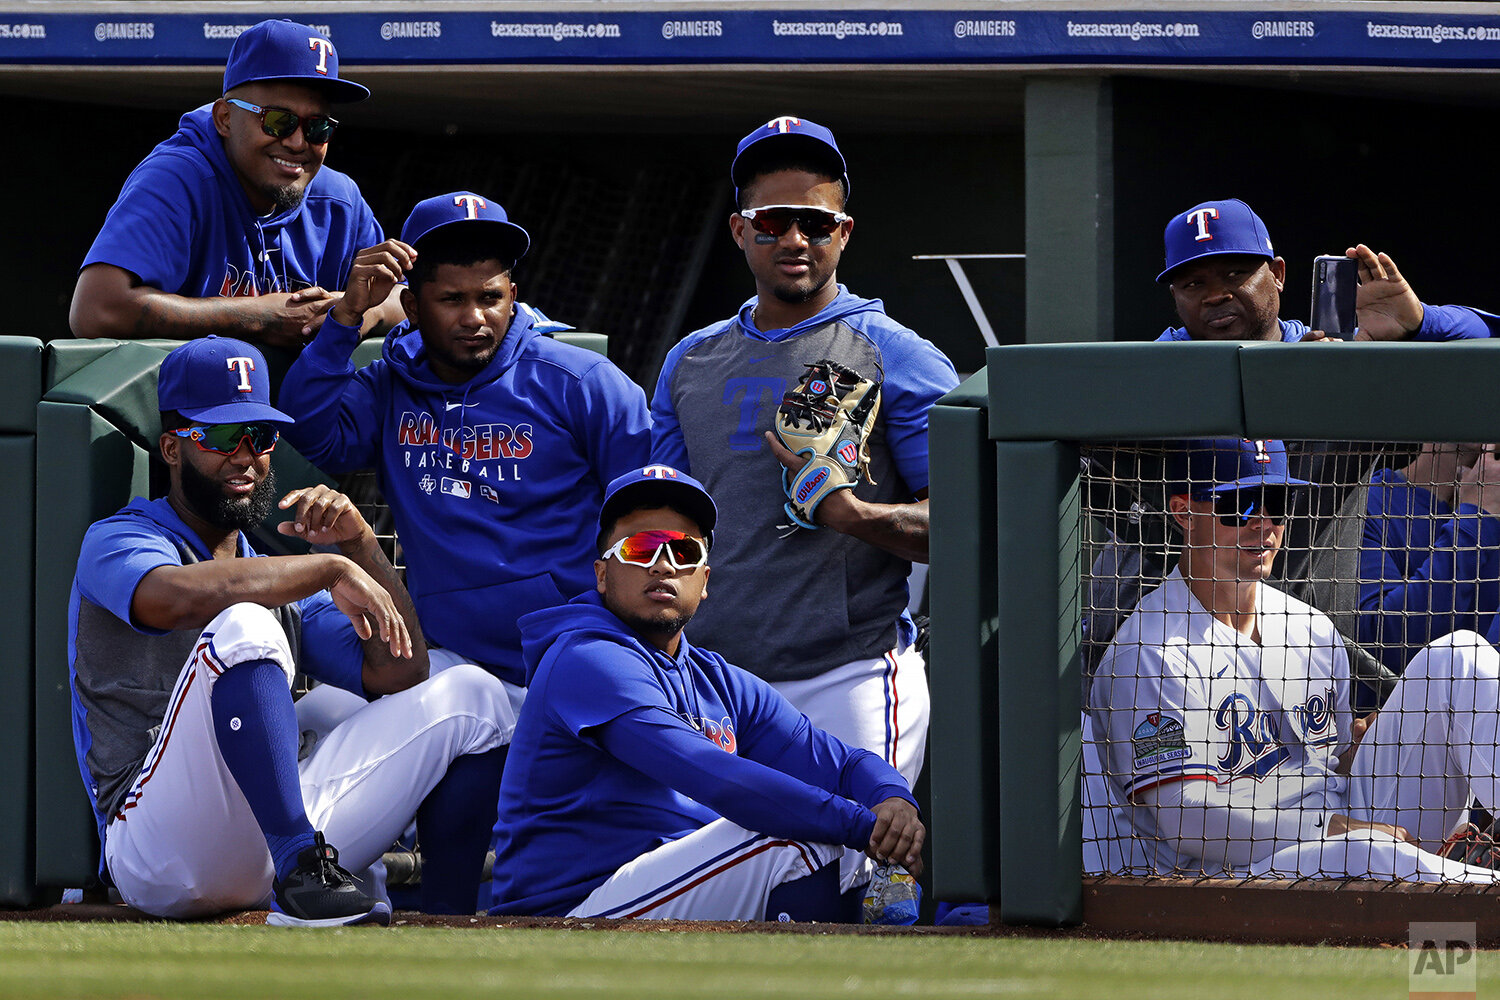  Texas Rangers players watch from the dugout during the second inning of a spring training baseball game against the Chicago Cubs Thursday, Feb. 27, 2020, in Surprise, Ariz. (AP Photo/Charlie Riedel) 